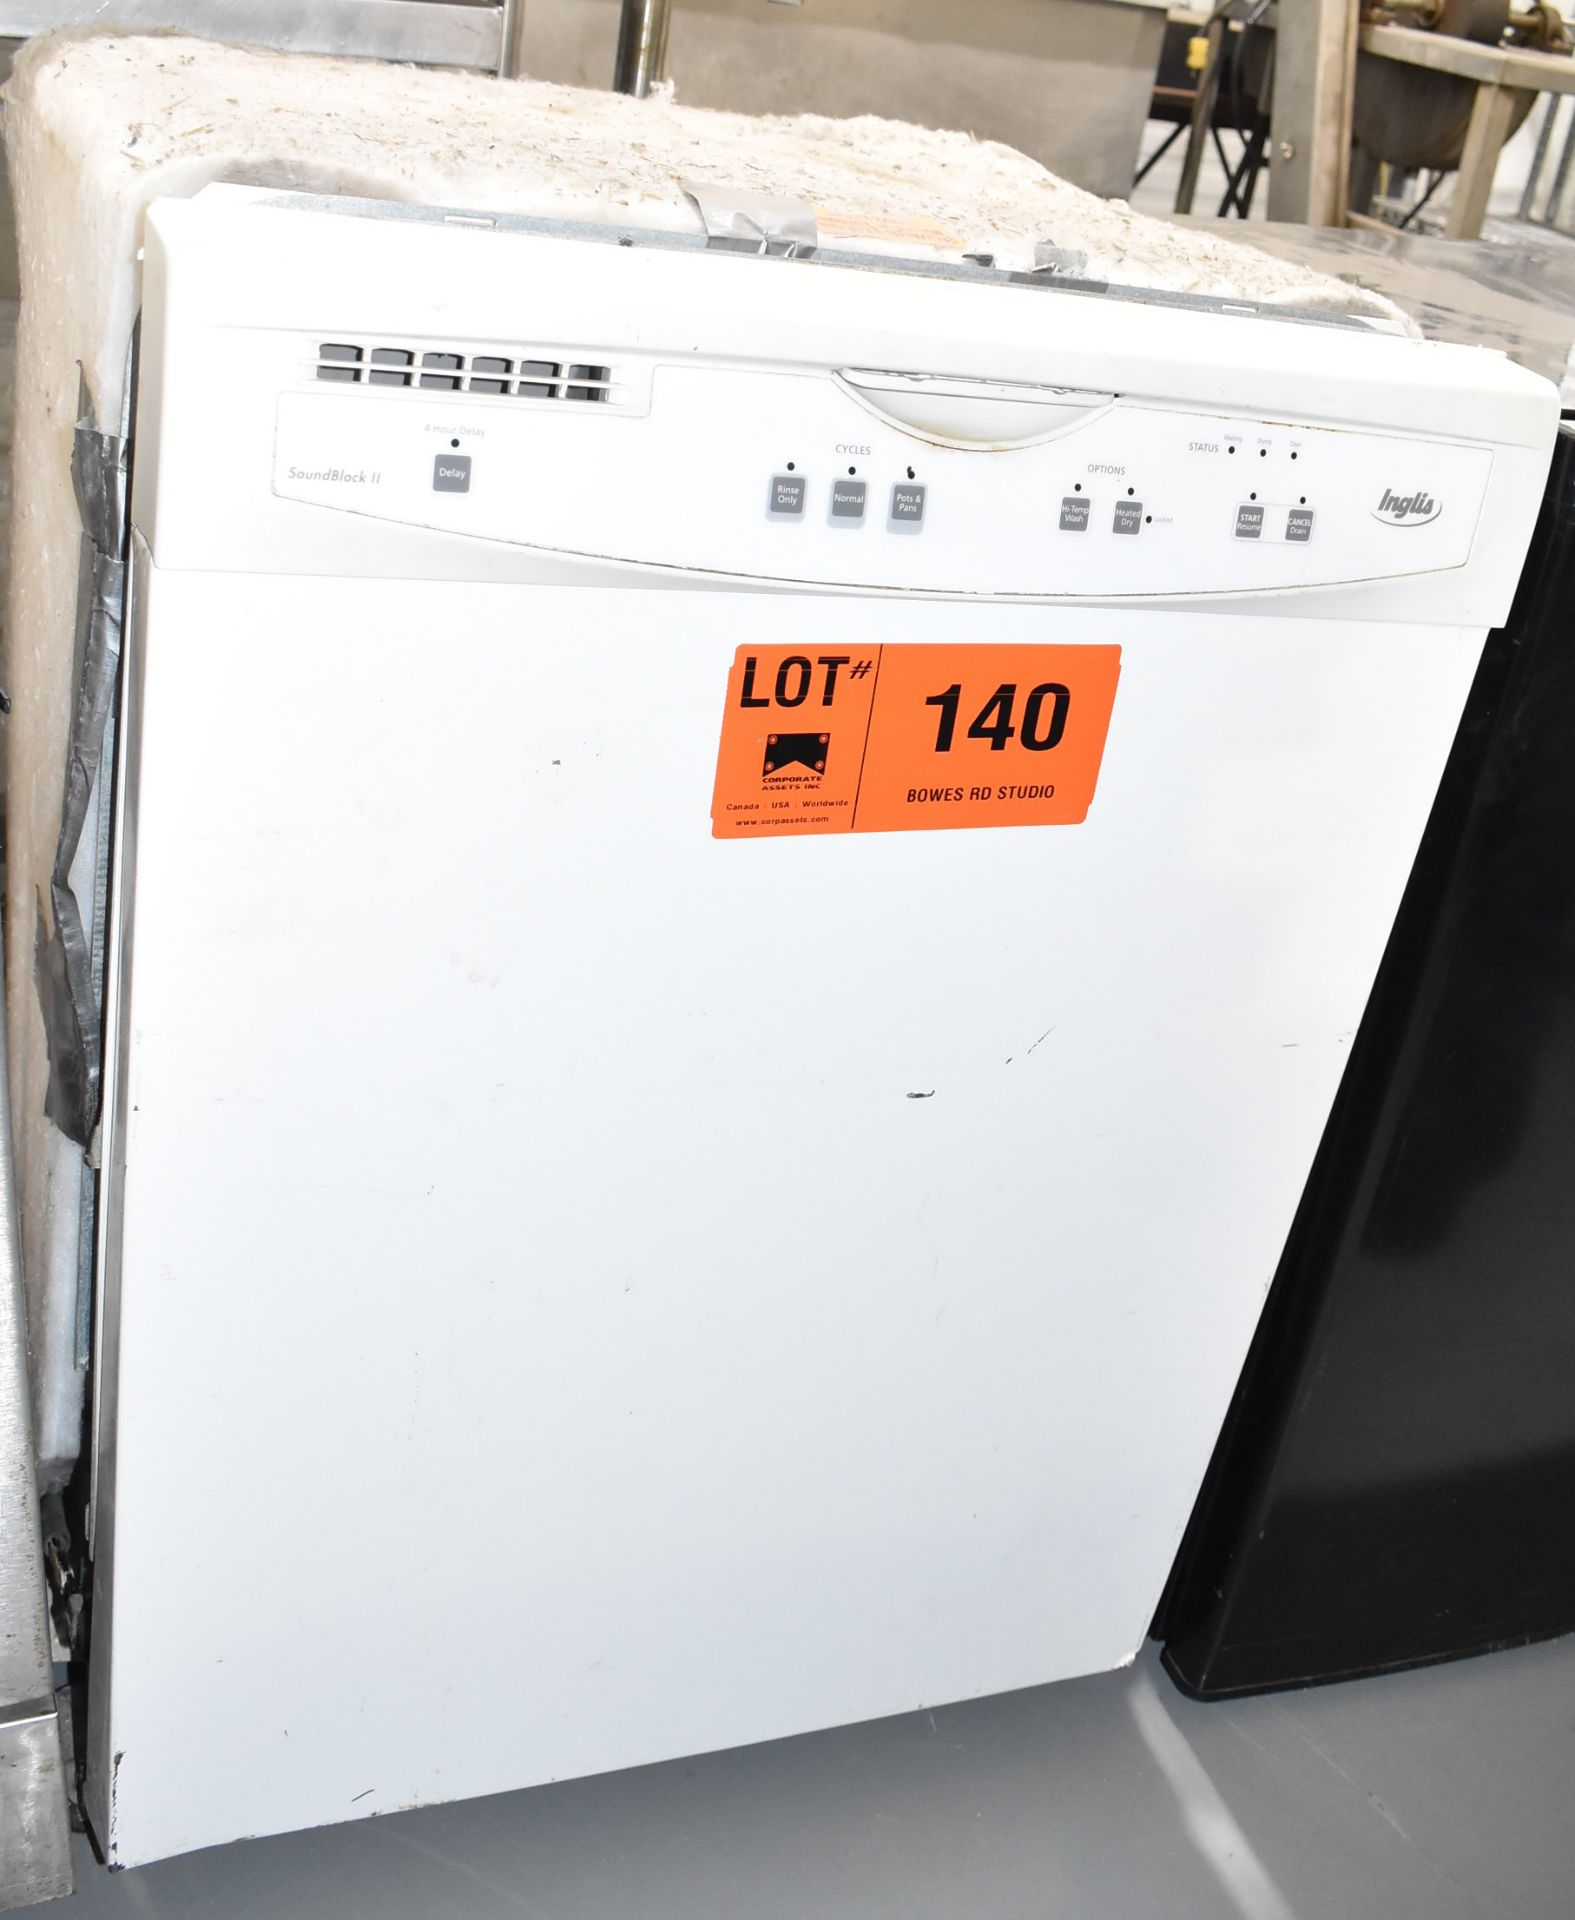 INGLIS IWU98661 DISHWASHER, S/N F00302848 [RIGGING FEES FOR LOT #140 - $25 CAD PLUS APPLICABLE